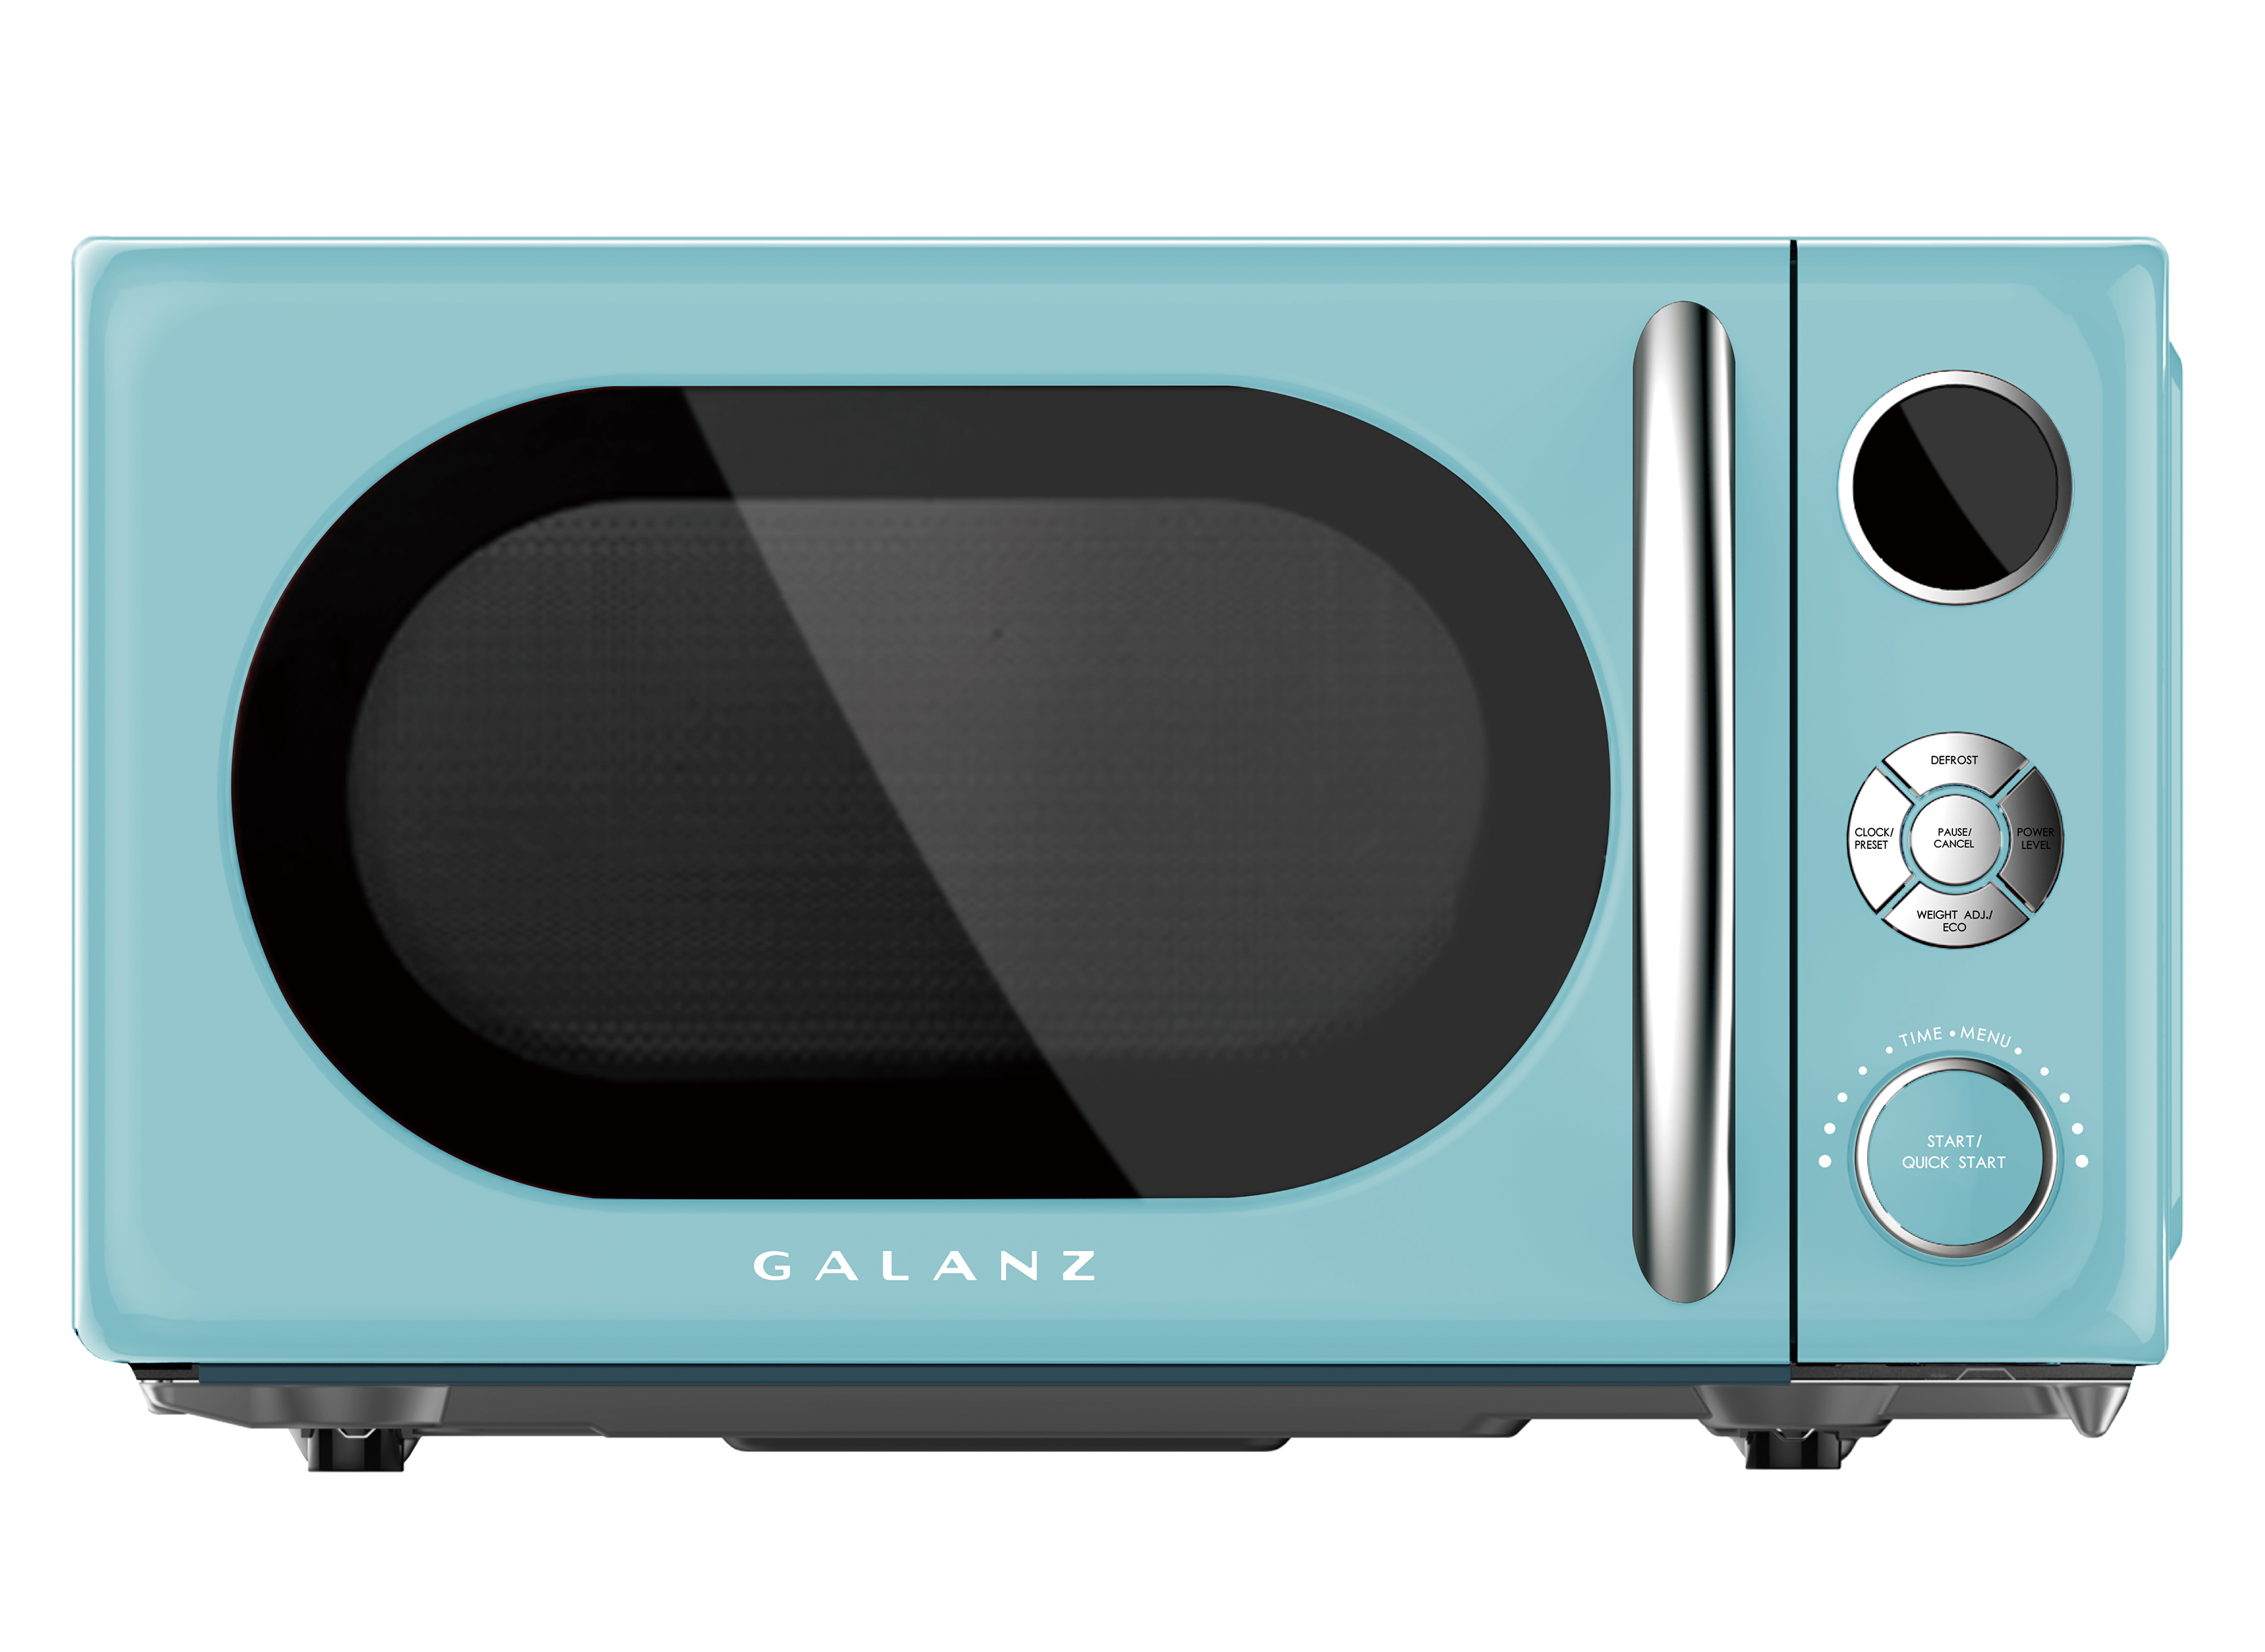 https://crdms.images.consumerreports.org/prod/products/cr/models/404095-small-countertop-microwaves-galanz-glcmka07ber-07-10021518.png